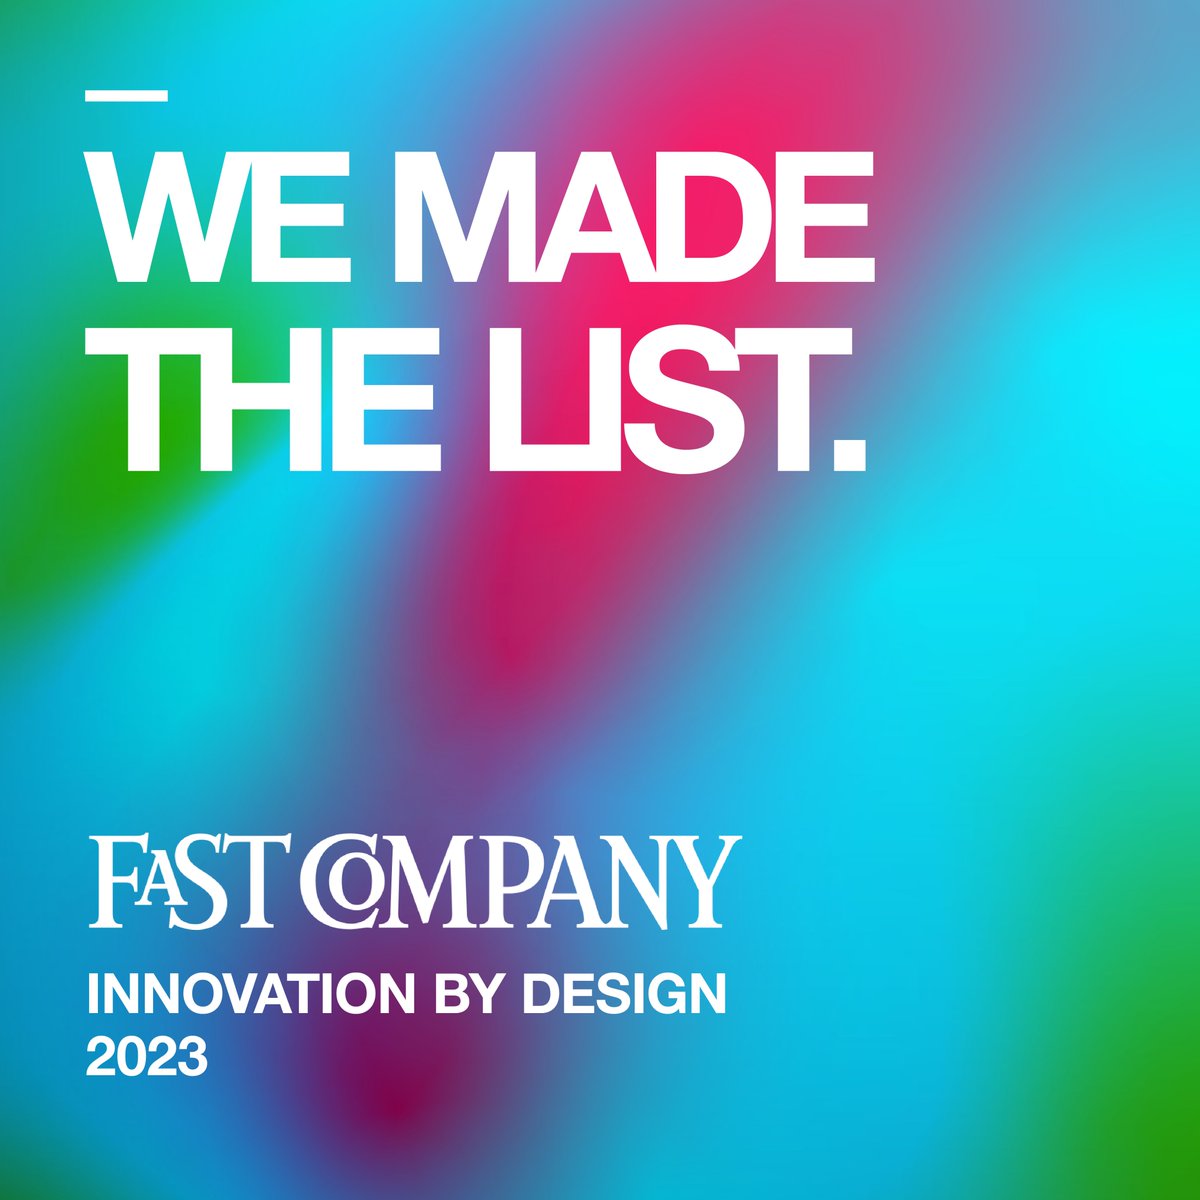 Impacting user accessibility and the community is worth celebrating. BNO is proud to be honored by @FastCompany in its 2023 Innovation by Design Awards for our work with Marylands Farm Park! See more of our work here: bit.ly/3QJ4XhM #FCDesignAwards #digitalaccessibility